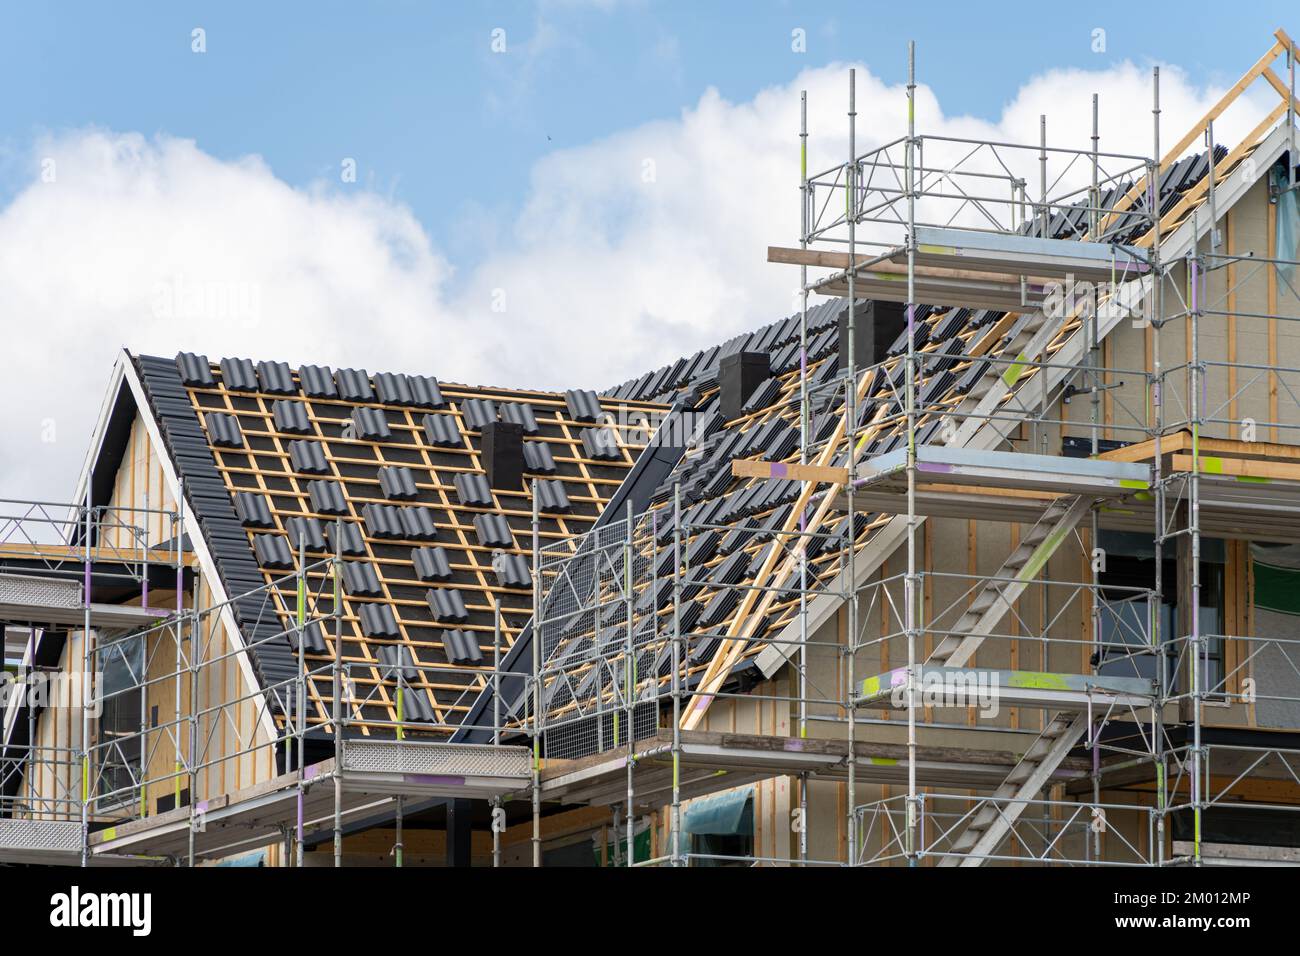 Image of Unfinished roof timber frames being built for modern scandinavian apartment house Stock Photo